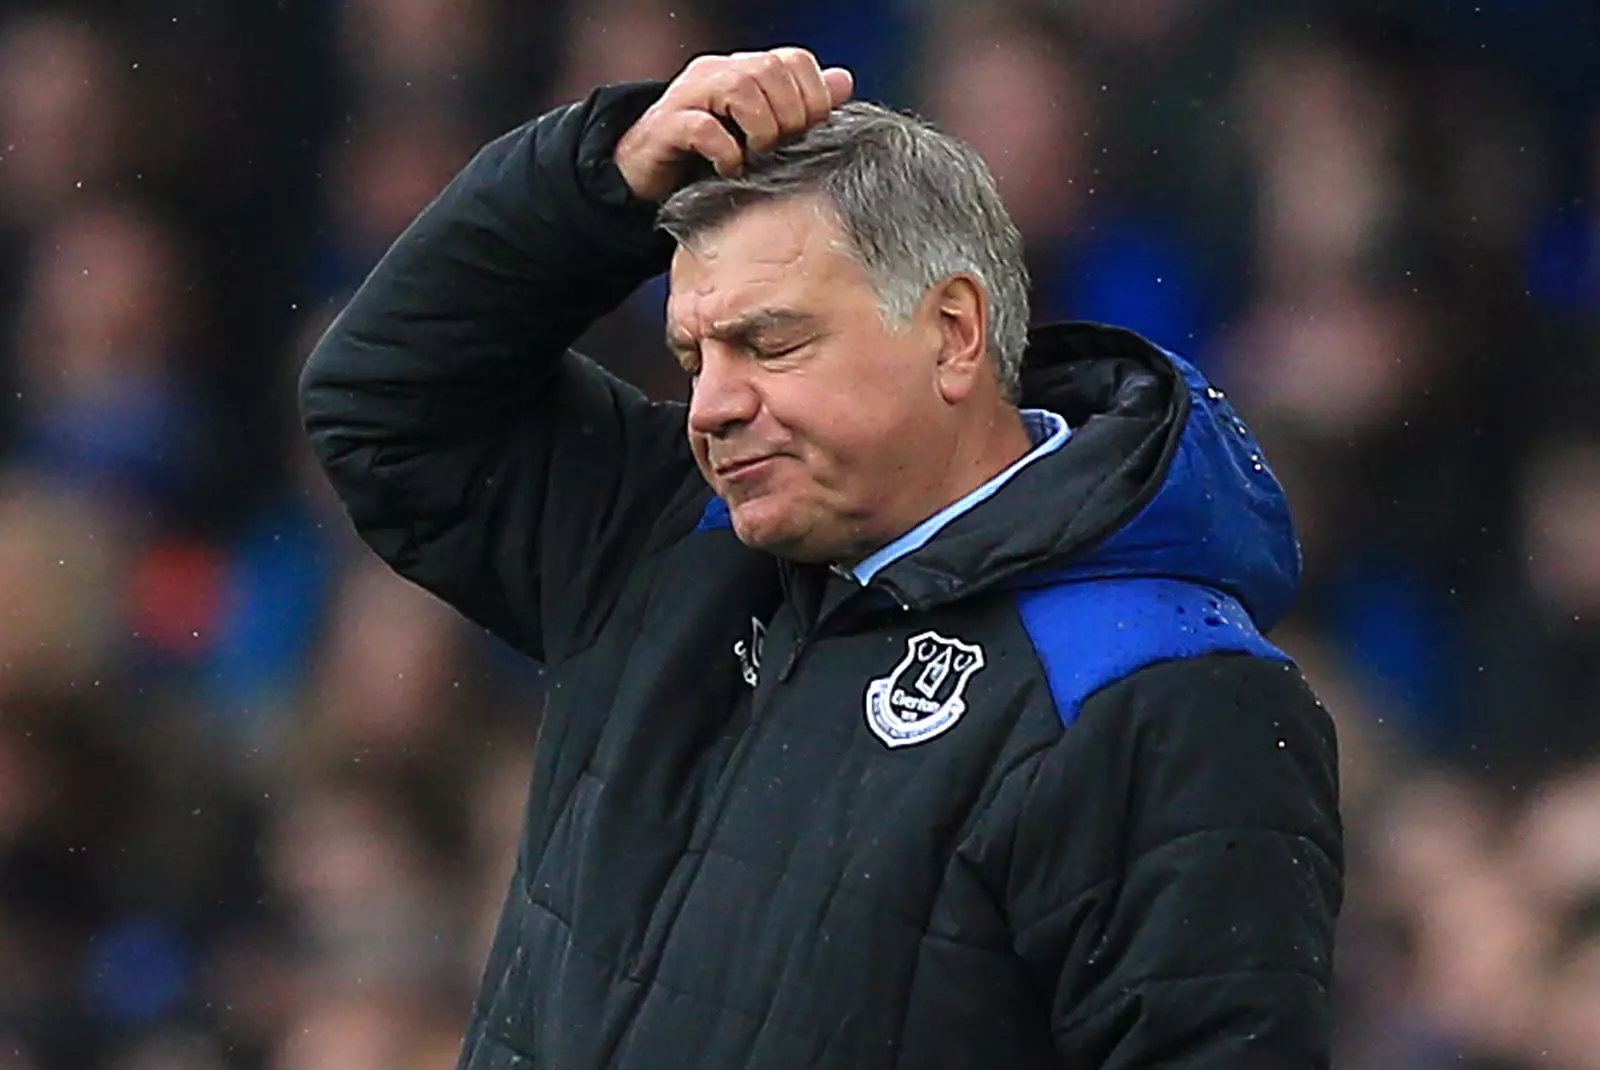 Allardyce's time at Everton summed up. Image: PA Images